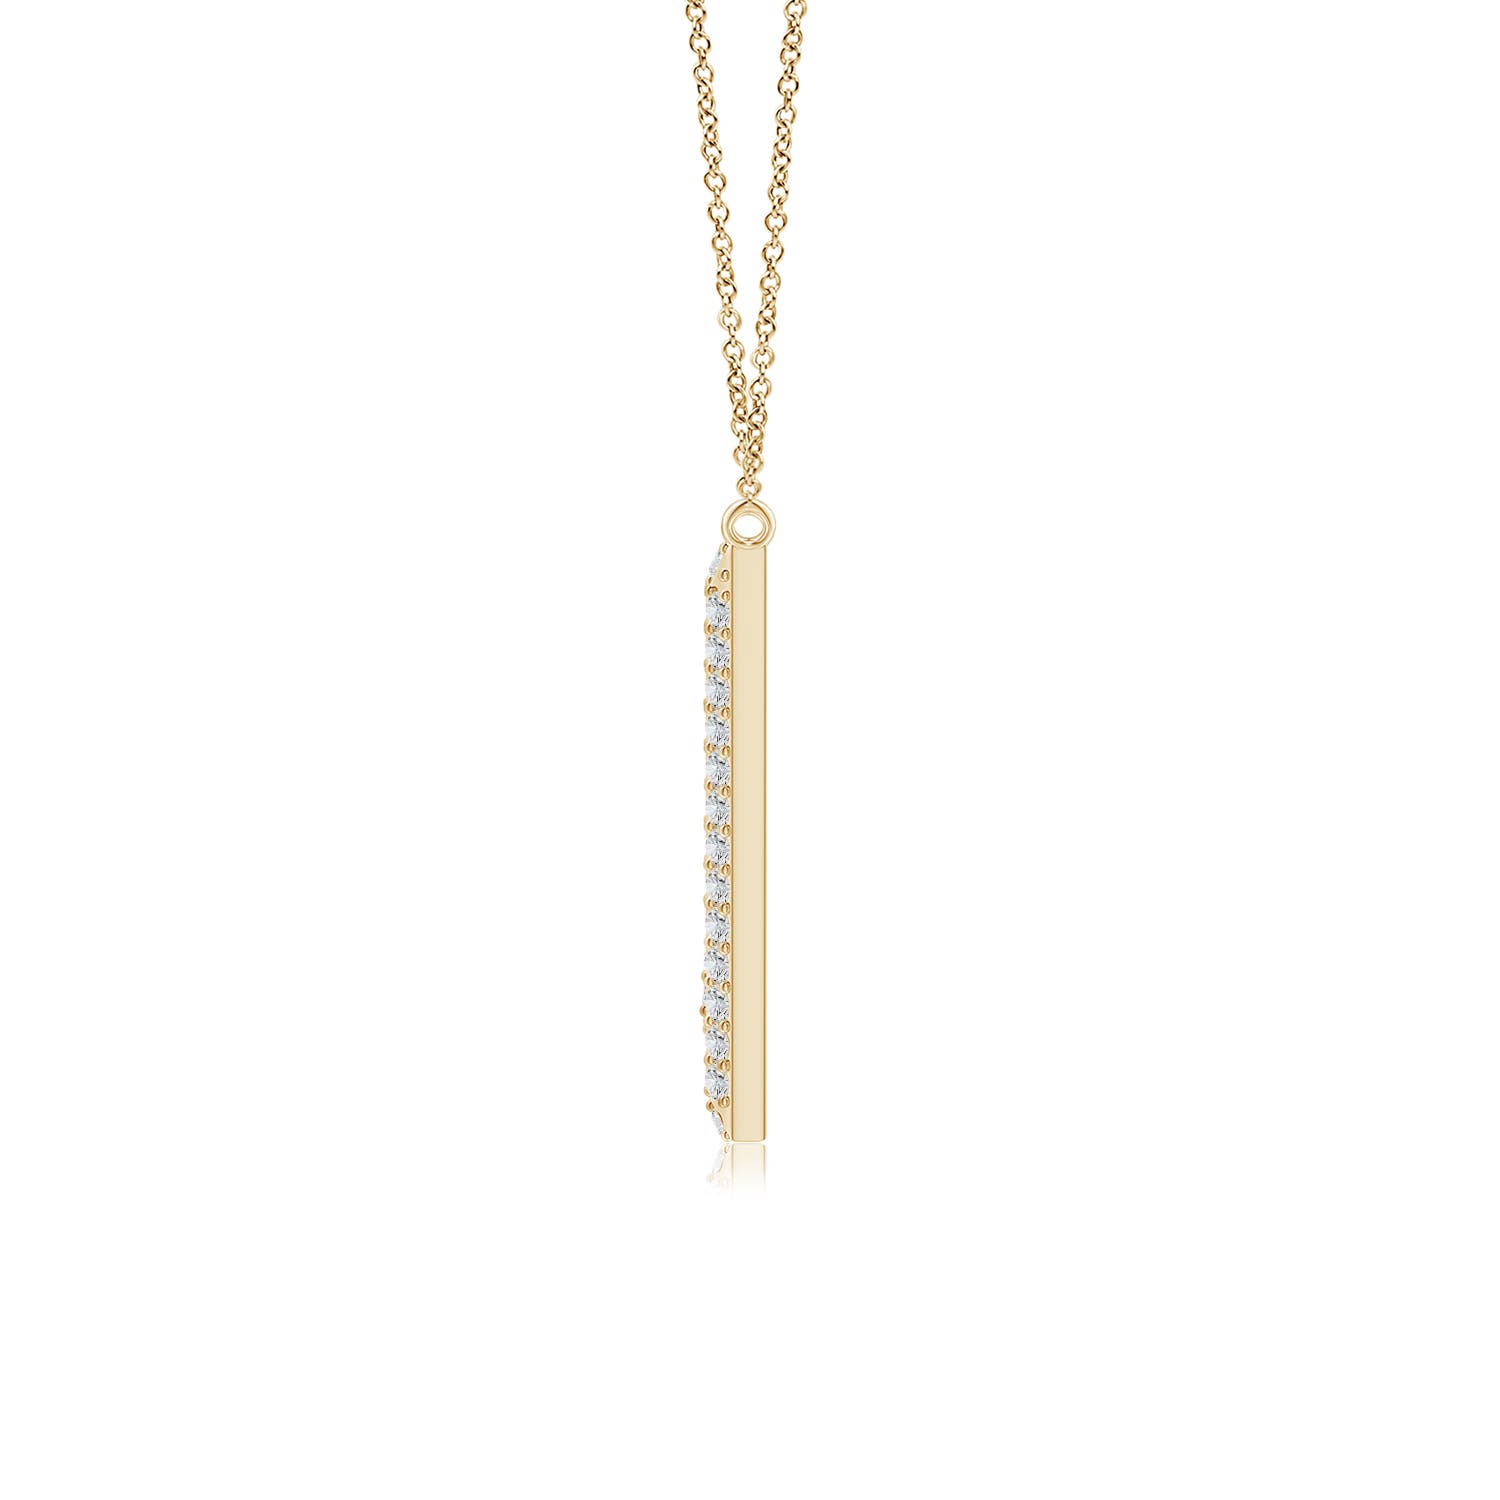 H, SI2 / 0.24 CT / 14 KT Yellow Gold